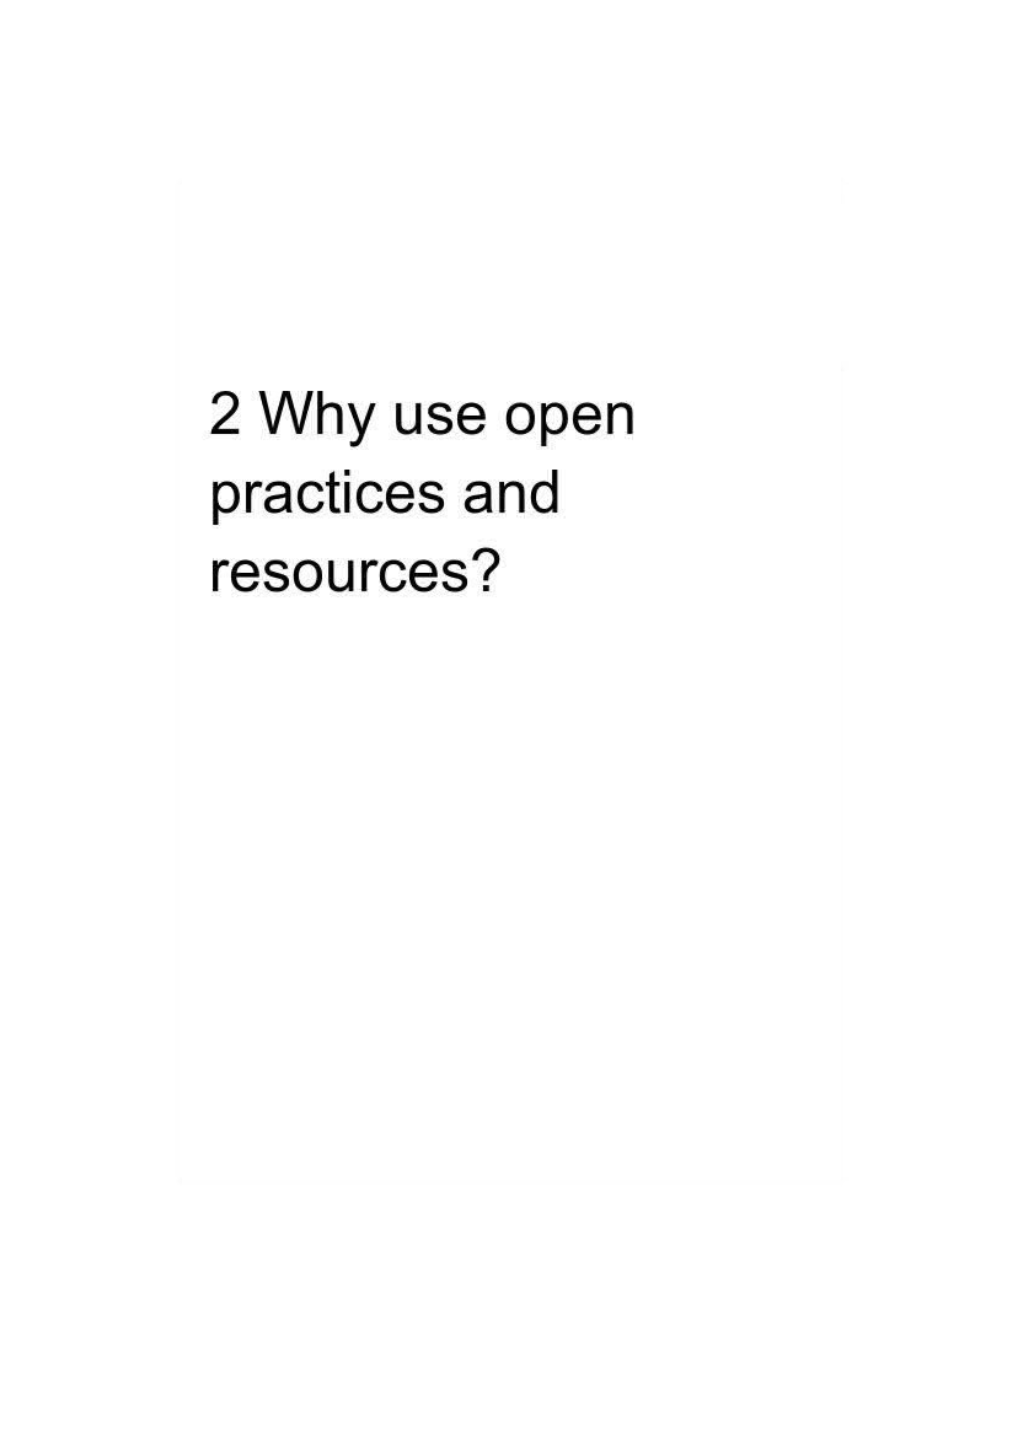 2 Why Use Open Practices and Resources?